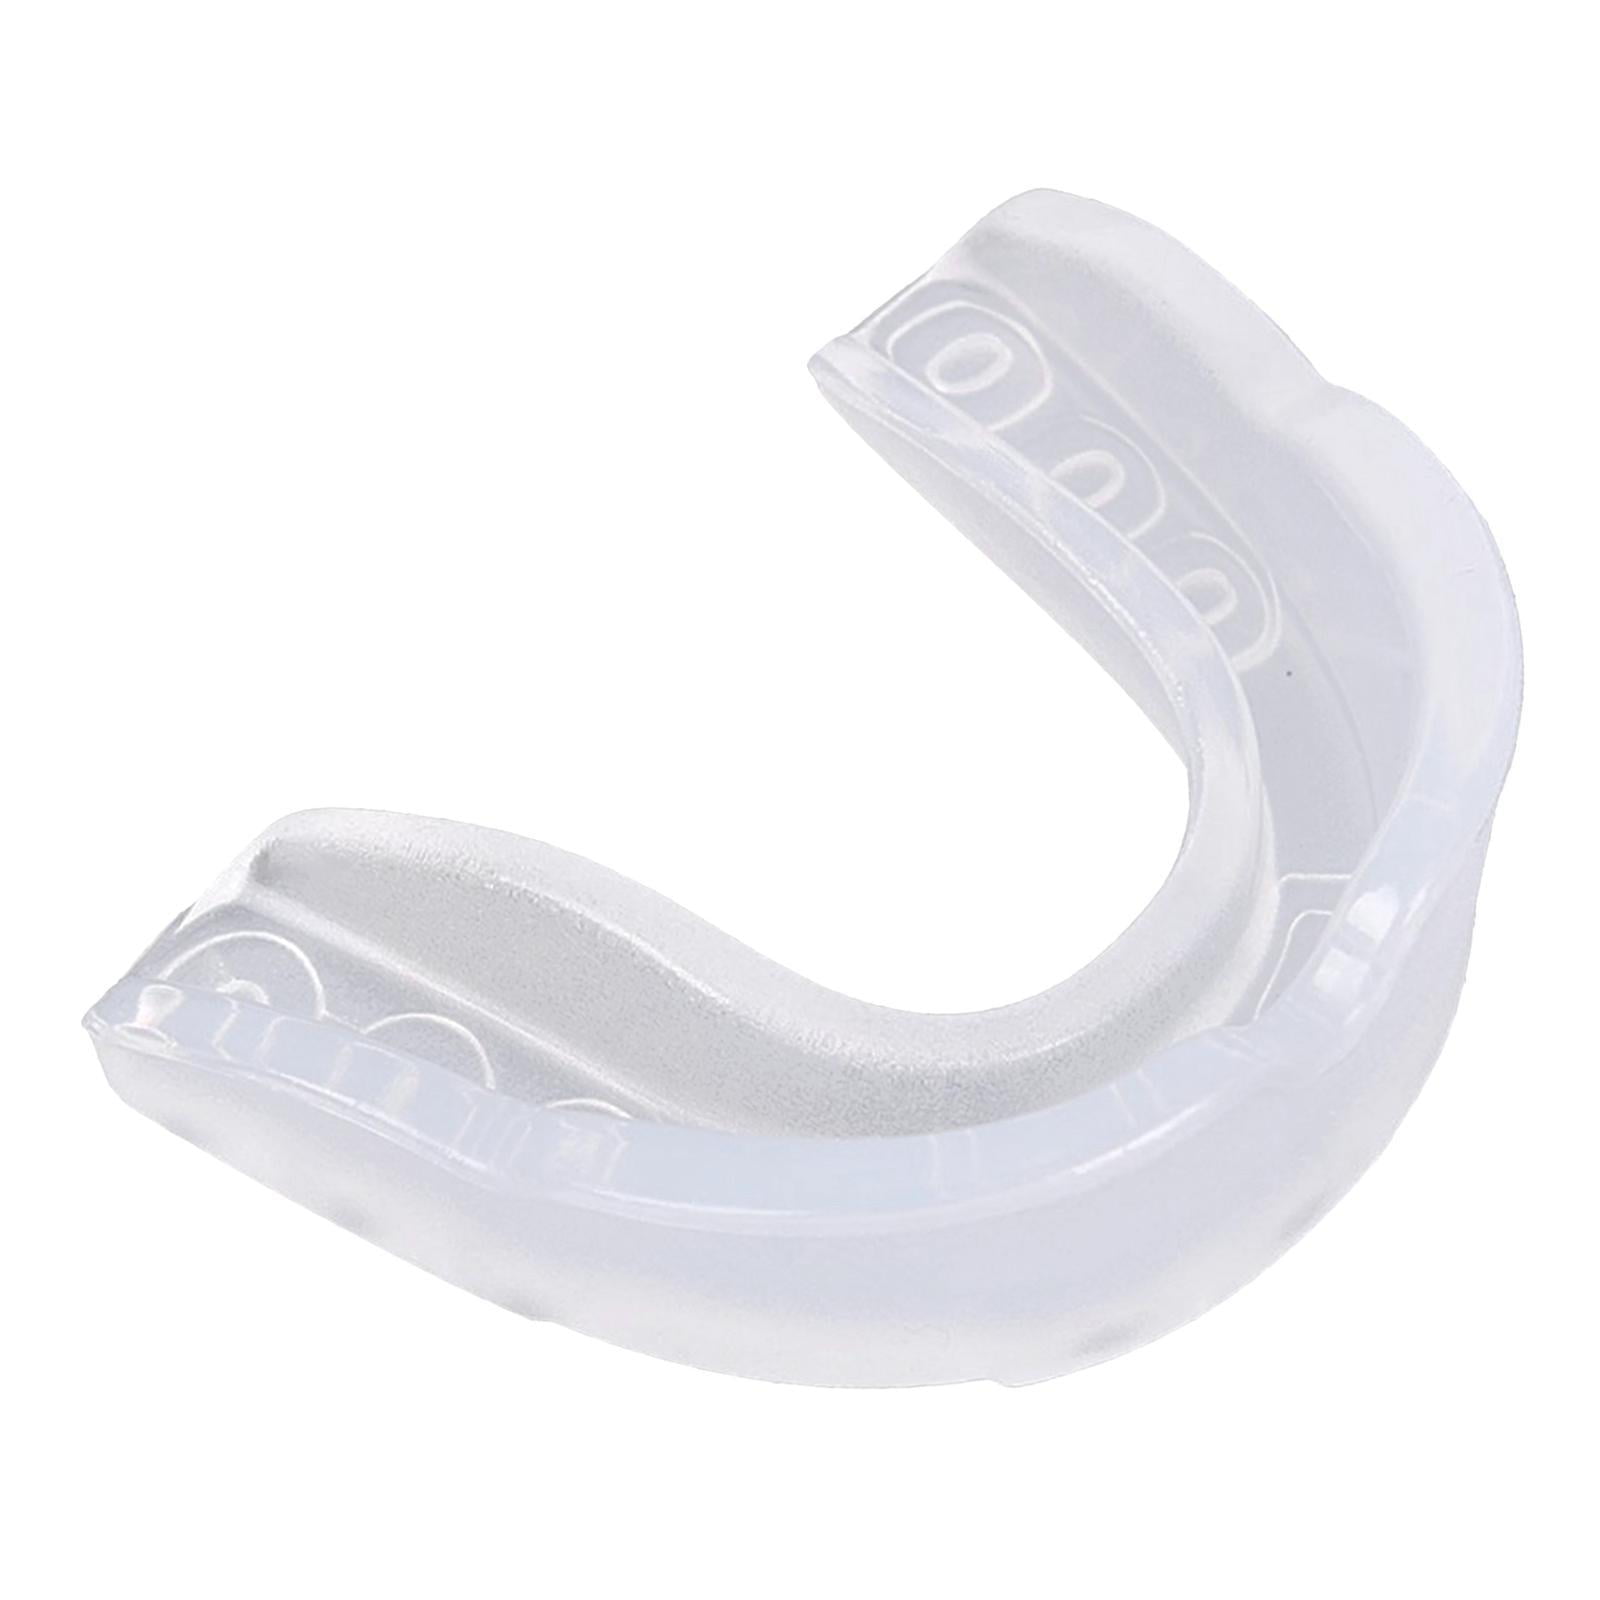 Adult Muay Boxing Mouth Guard Rugby Mouthguard Teeth Protection Mouth Piece 